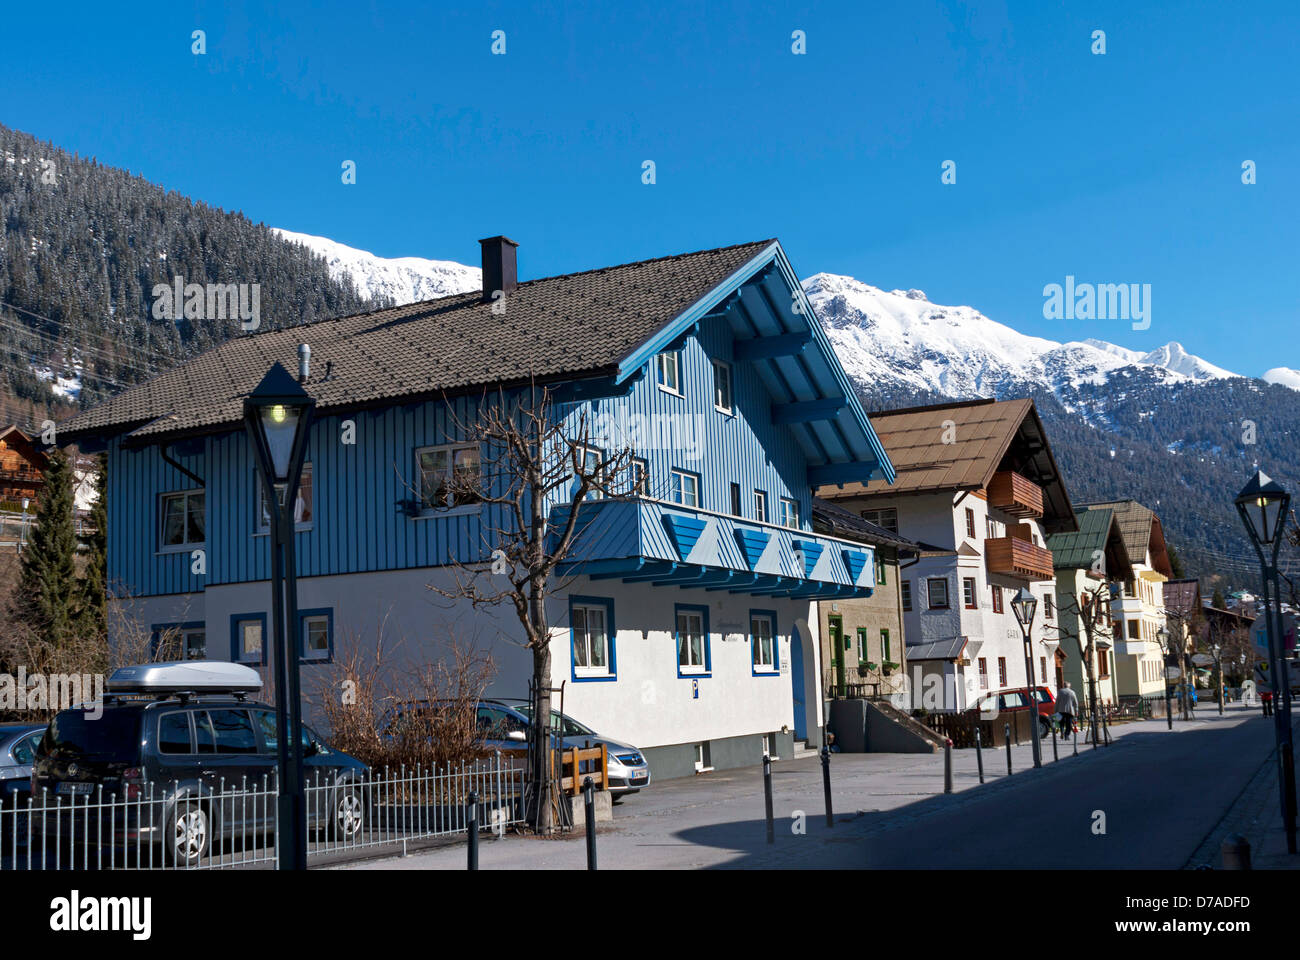 Traditional houses in the pretty Tyrolean village of St Anton am Arlberg, Austria Stock Photo